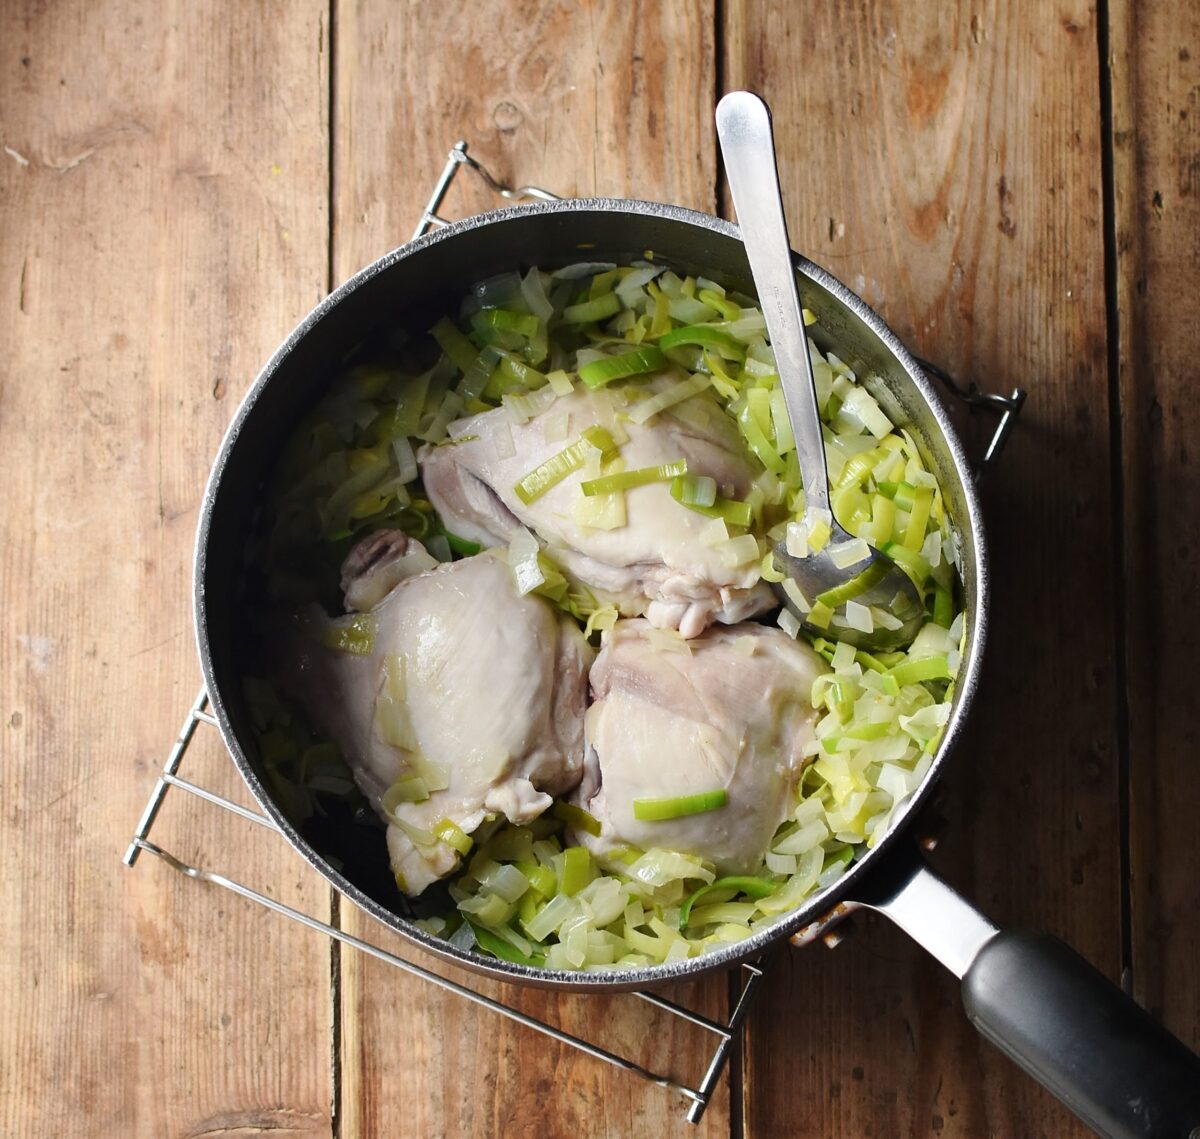 Chopped onion and leek and 3 skinless chicken thighs in large pot with spoon.